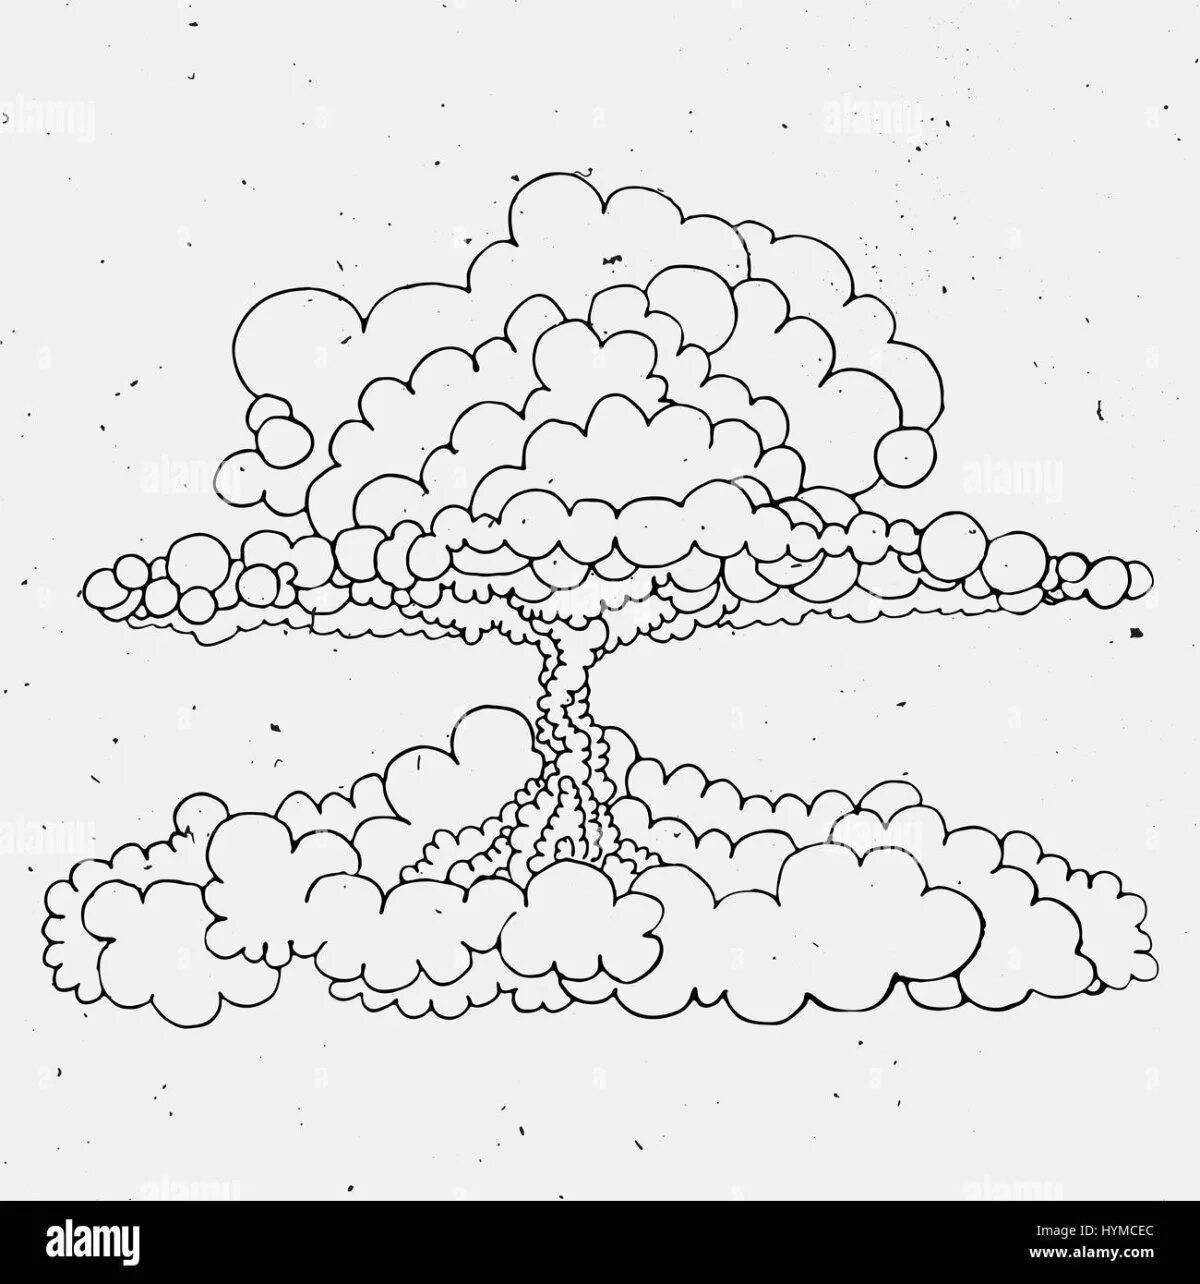 Amazing nuclear explosion coloring book